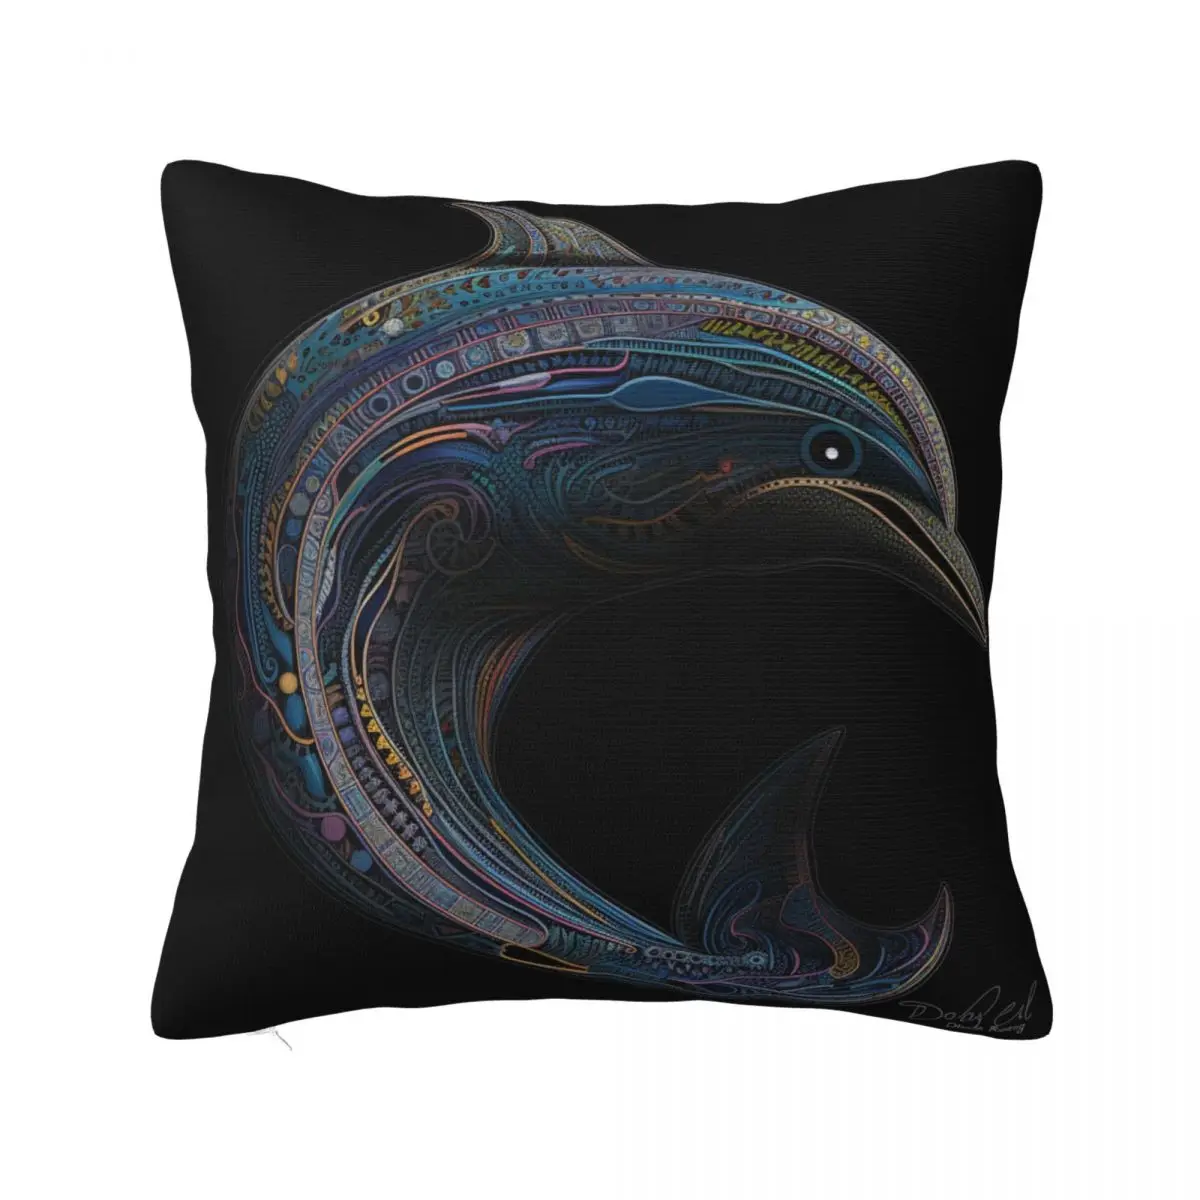 

Dolphin Pillow Case Art Illustration Intricate Lines Decorative Polyester Pillowcase Bedroom Zipper Spring Cover